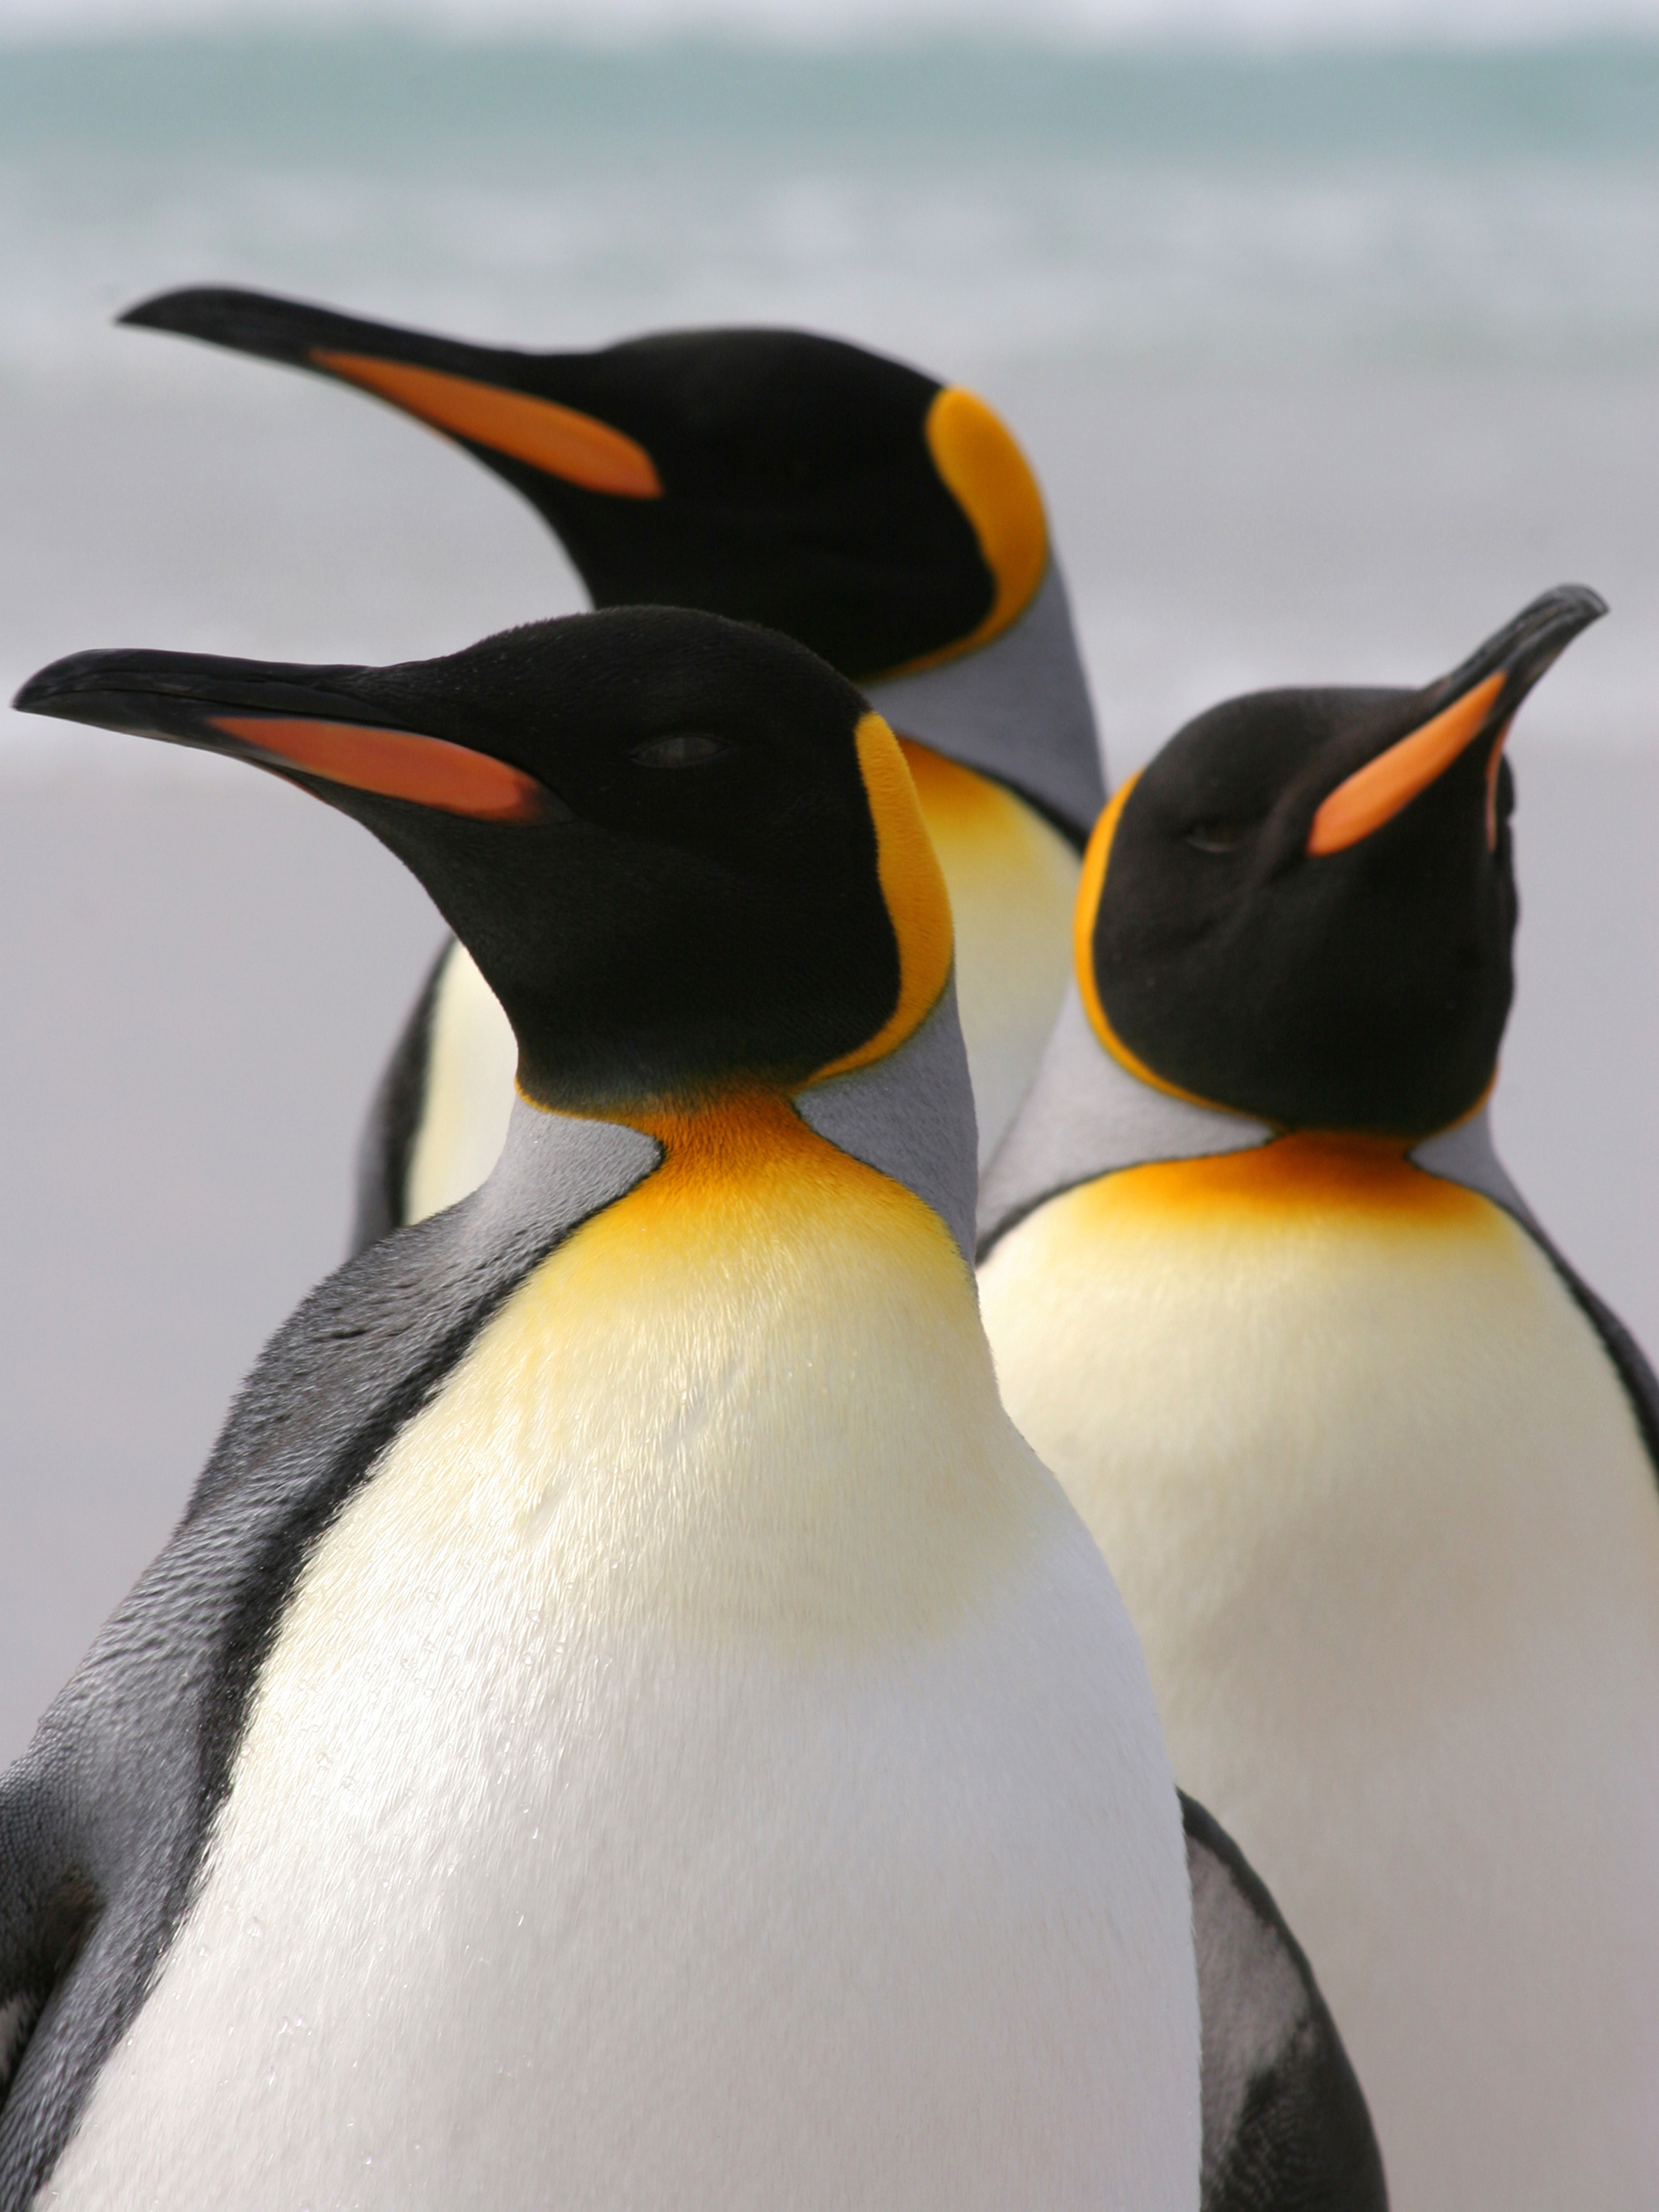 King Penguin  Facts, pictures & more about King Penguin